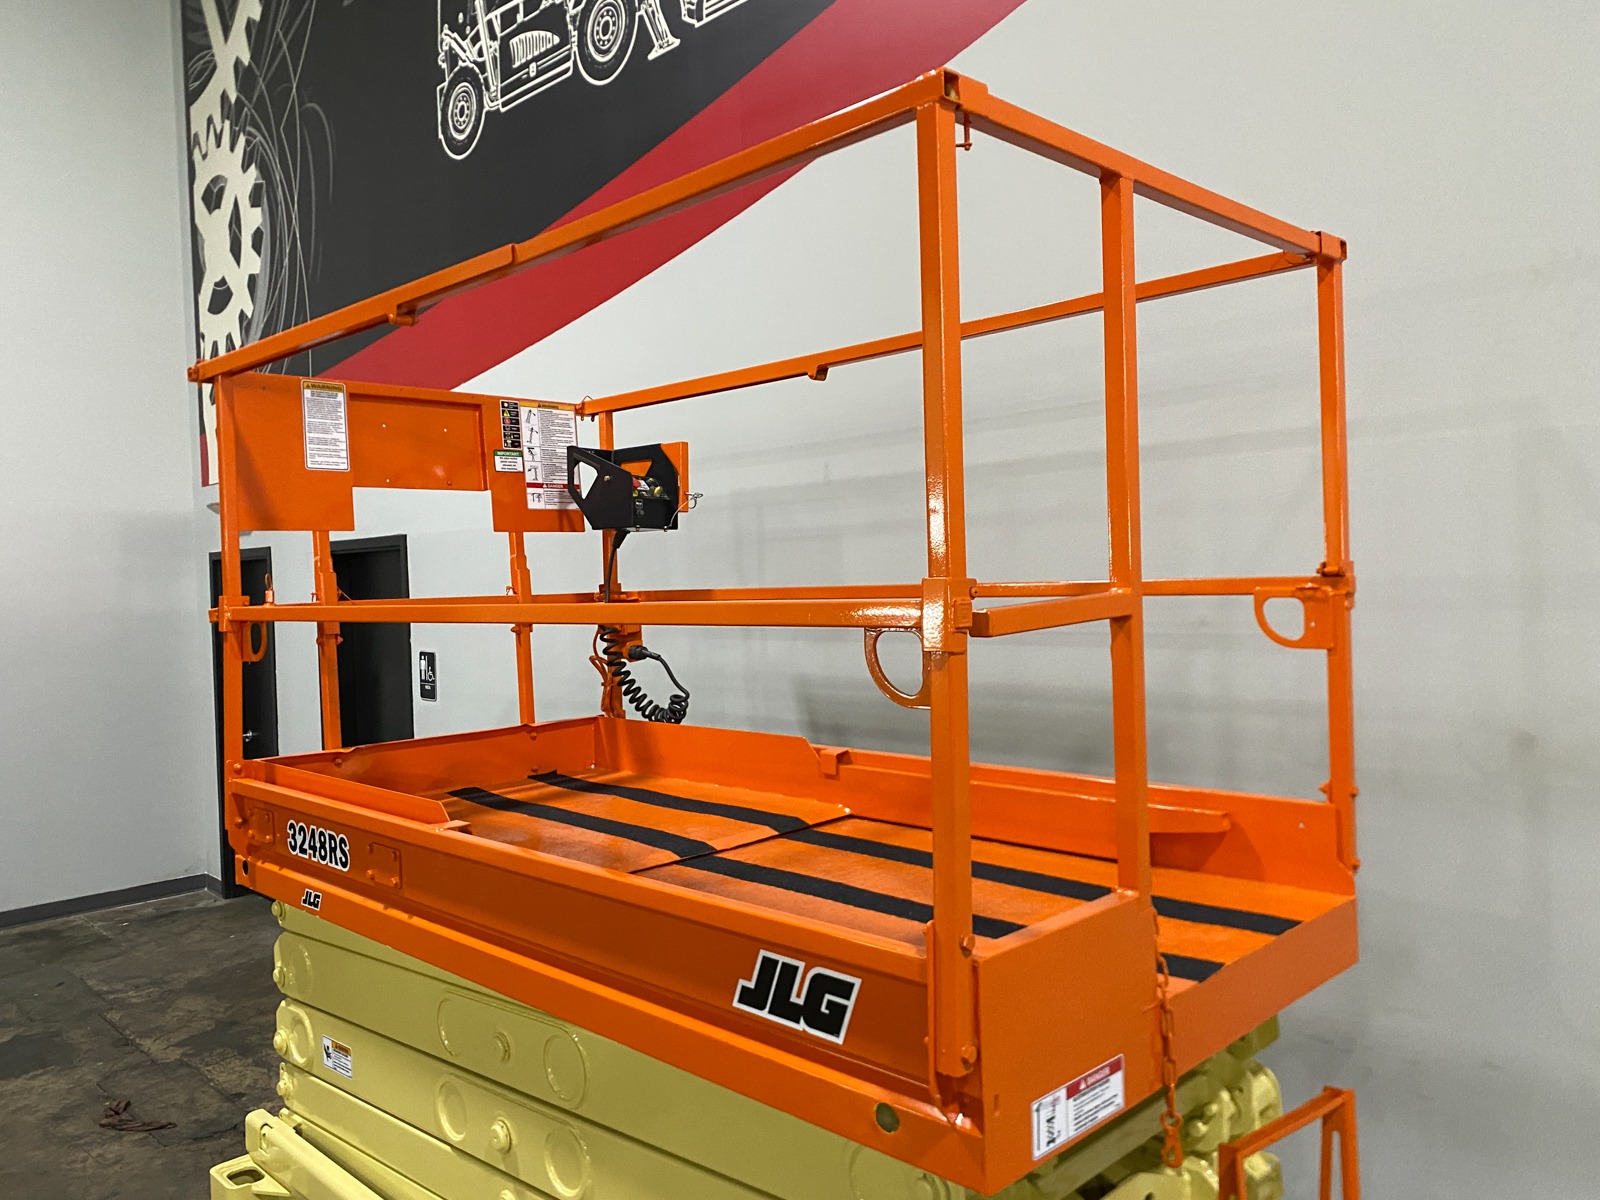 Used 2015 JLG 3248RS  | Cary, IL